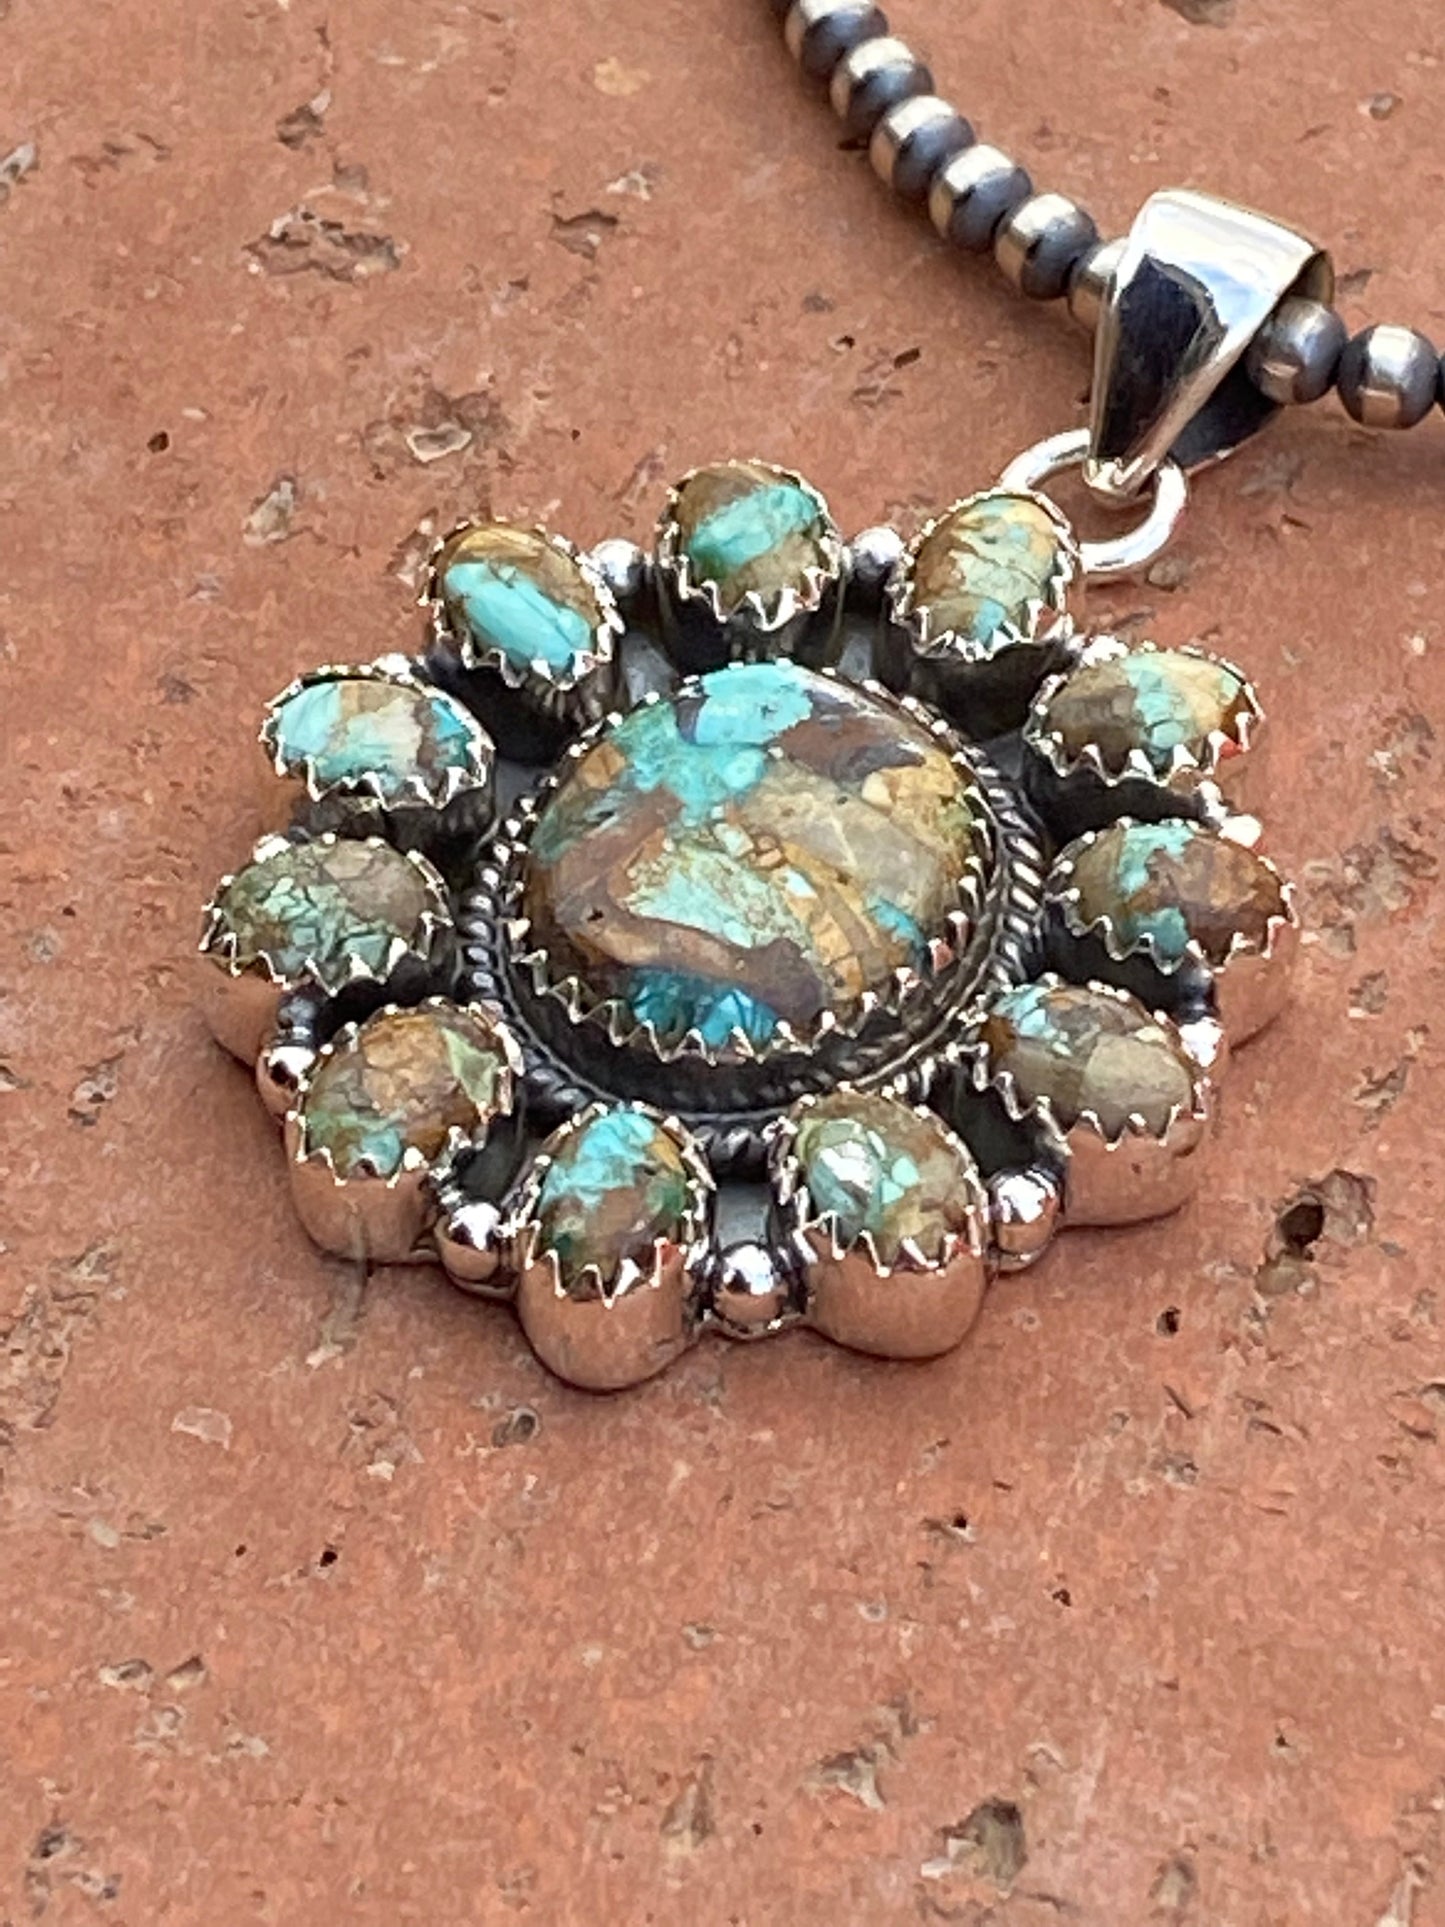 Handmade Sterling Silver & Royston Turquoise Cluster Pendant Signed